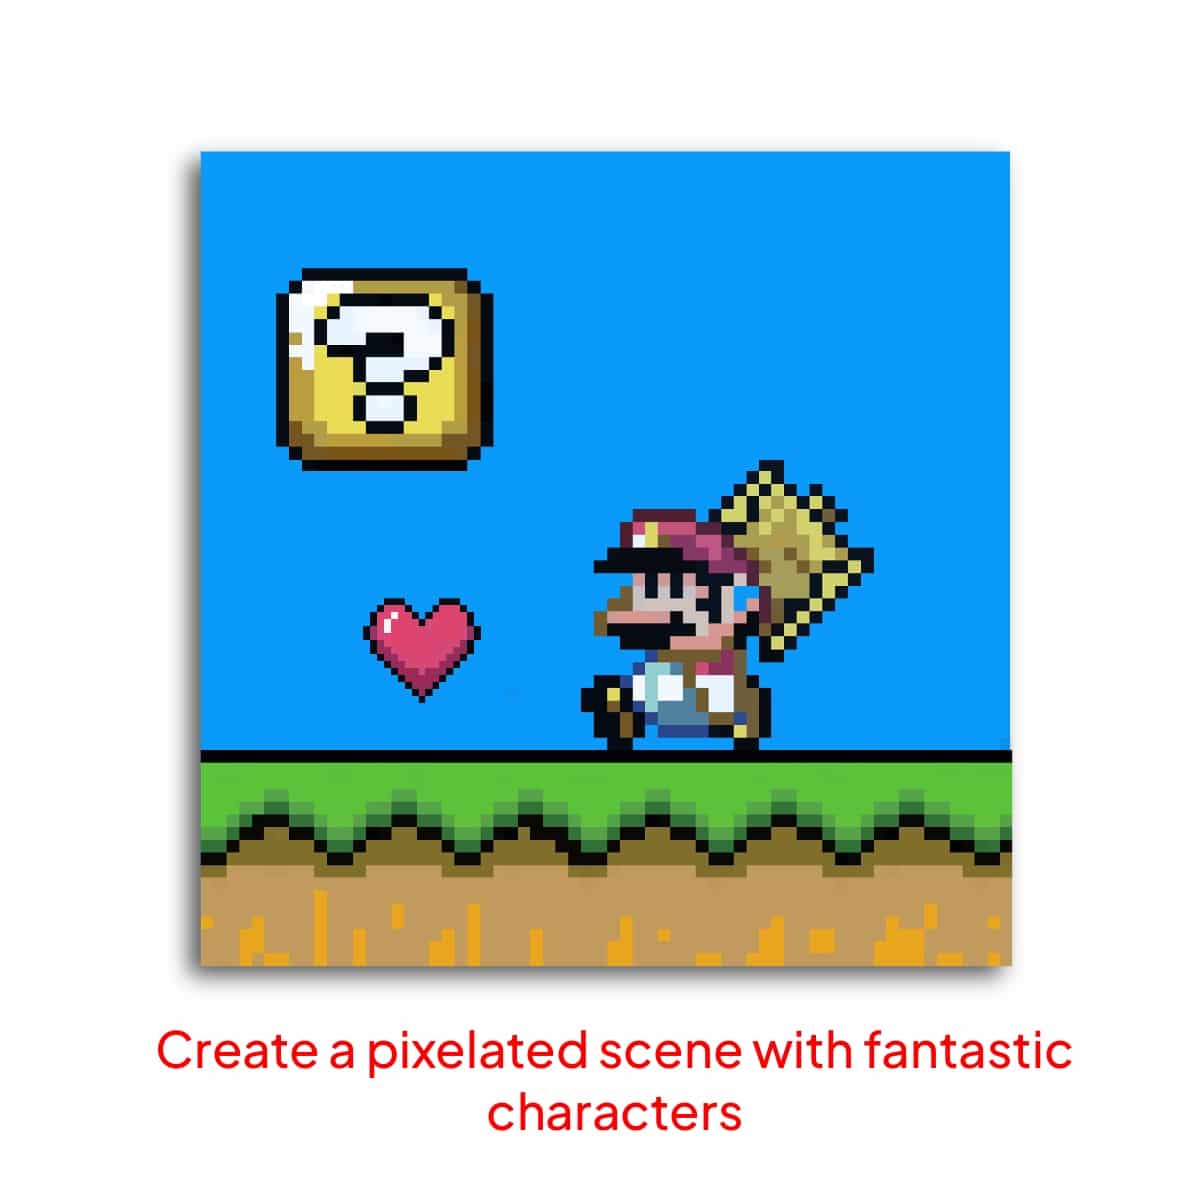 What To Draw As Pixel Art in Procreate?